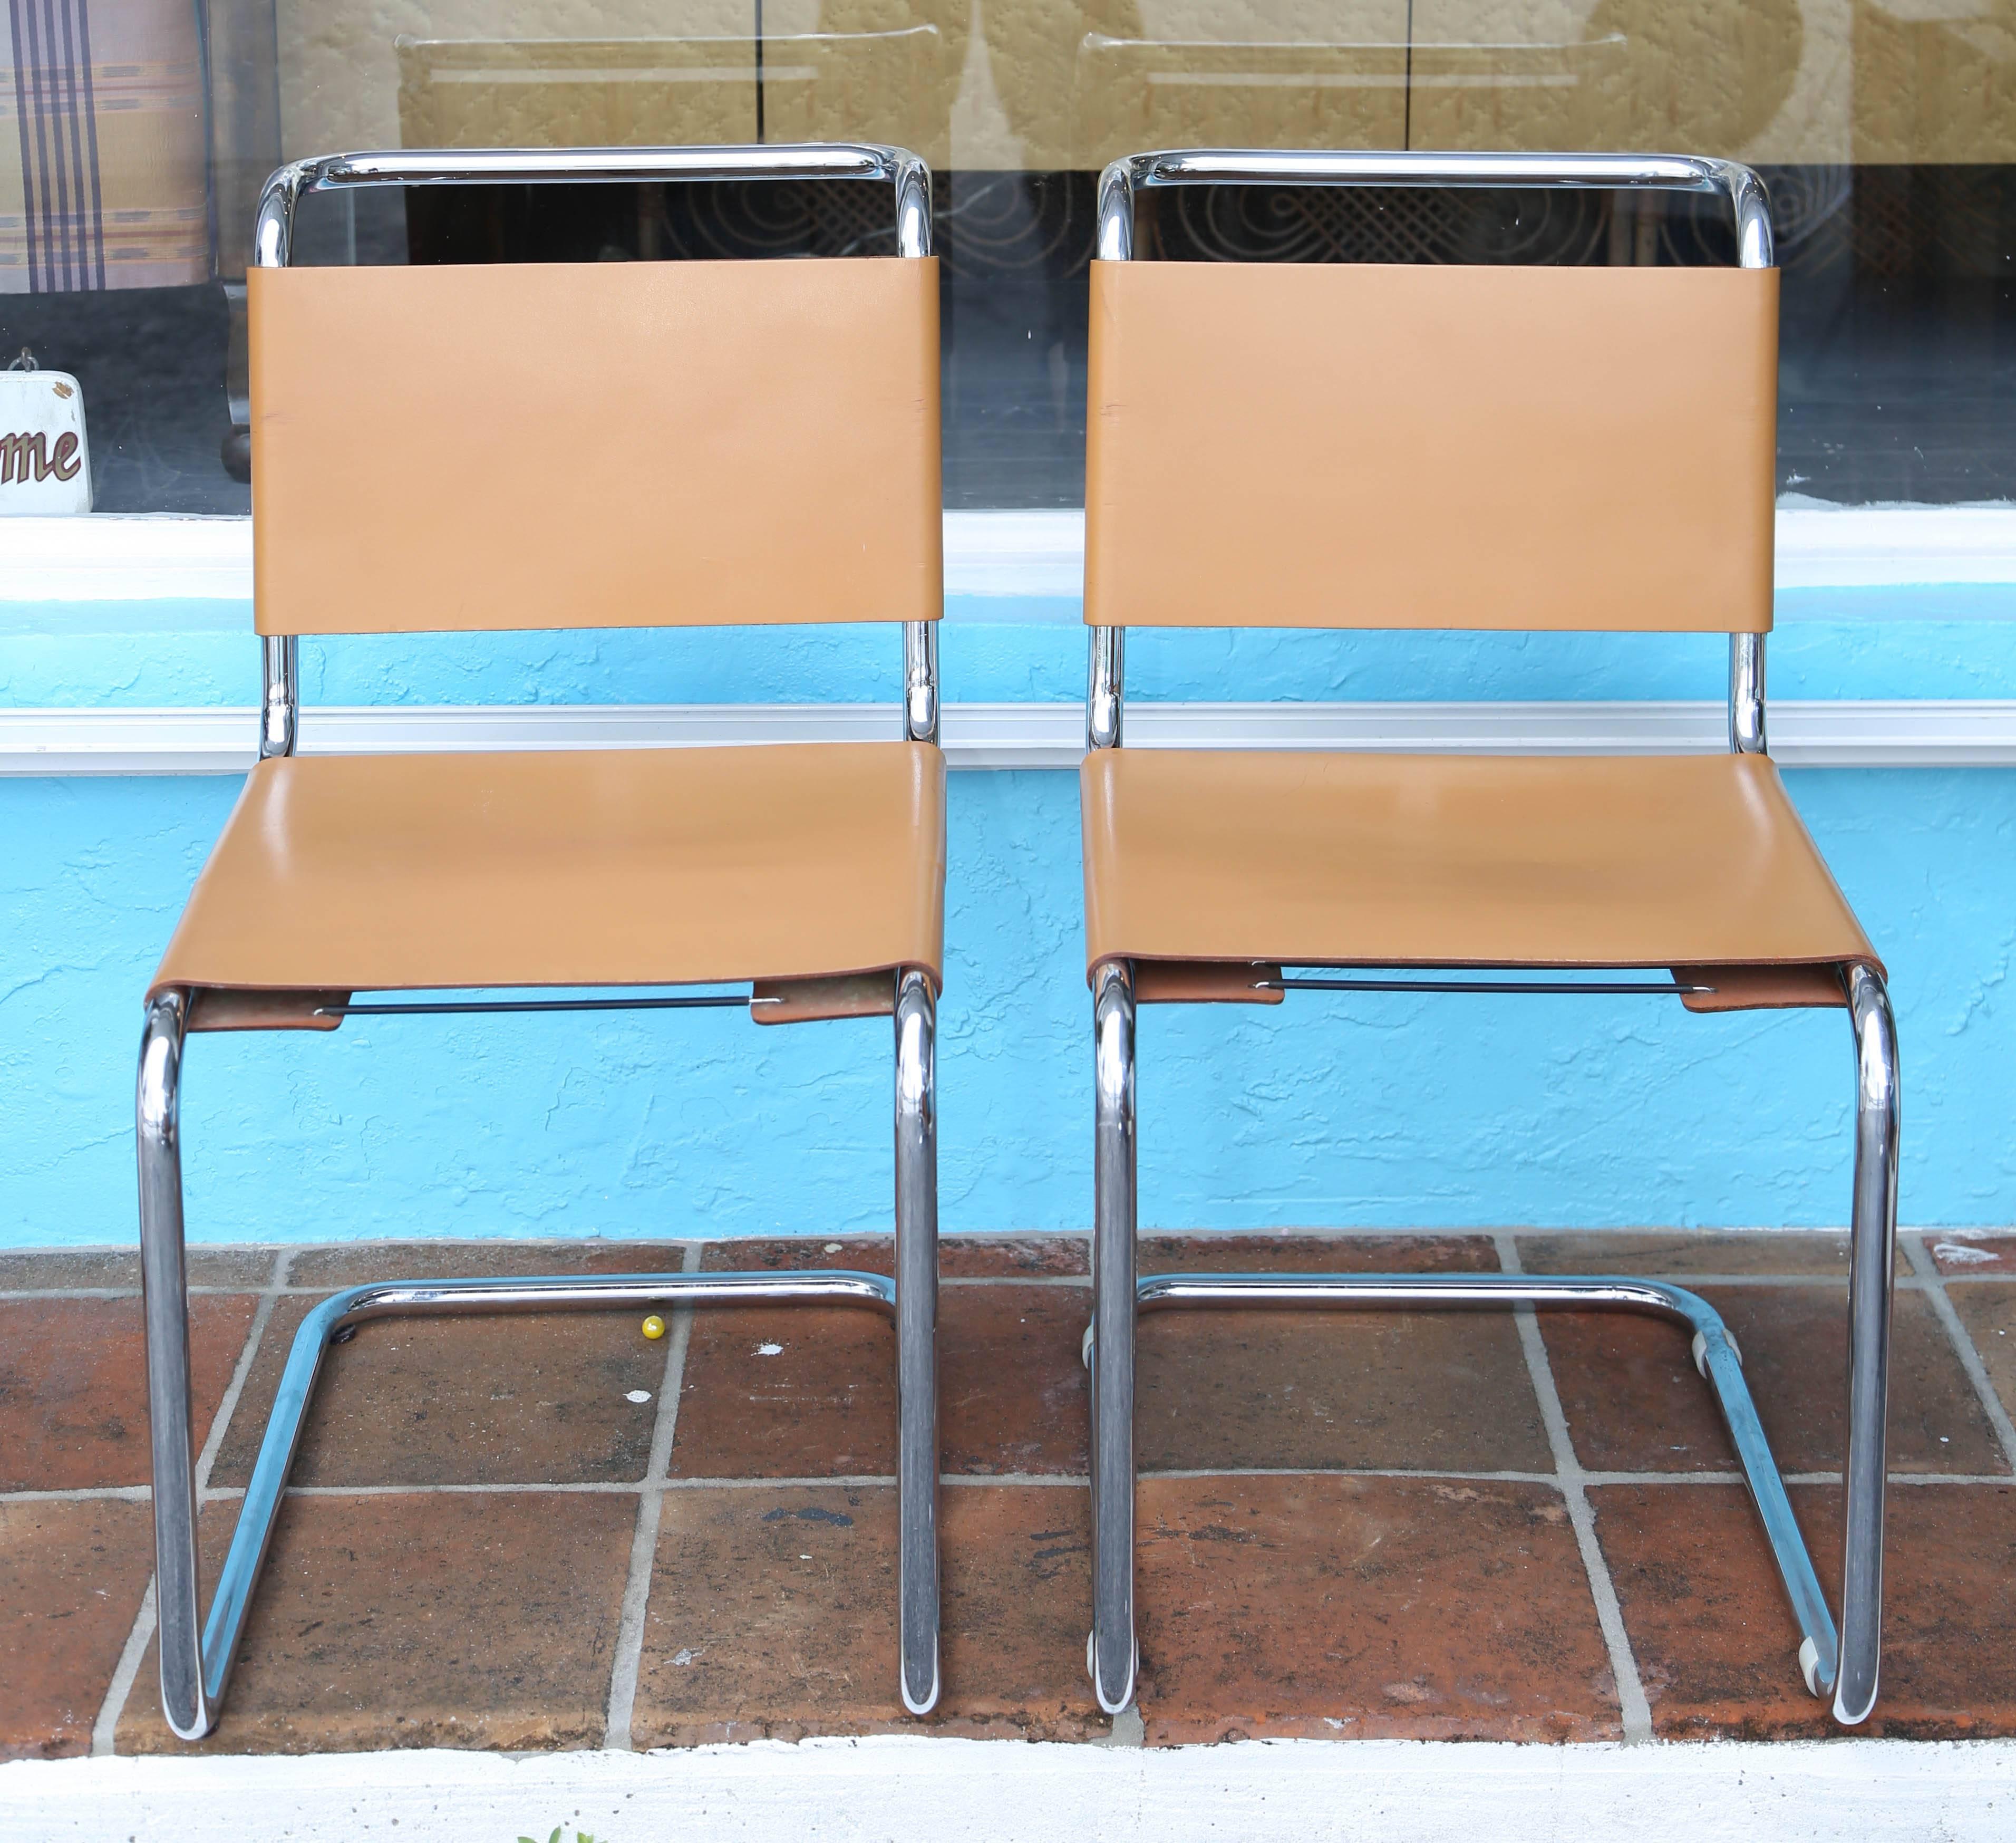 Classic Bauhaus Industrial age aesthetic of cantilevered tabular steel (chrome-plated) with laced leather backrest.
The pair of chairs are appointed with camel colored leather. An additional pair is available with
reddish brown leather seats and